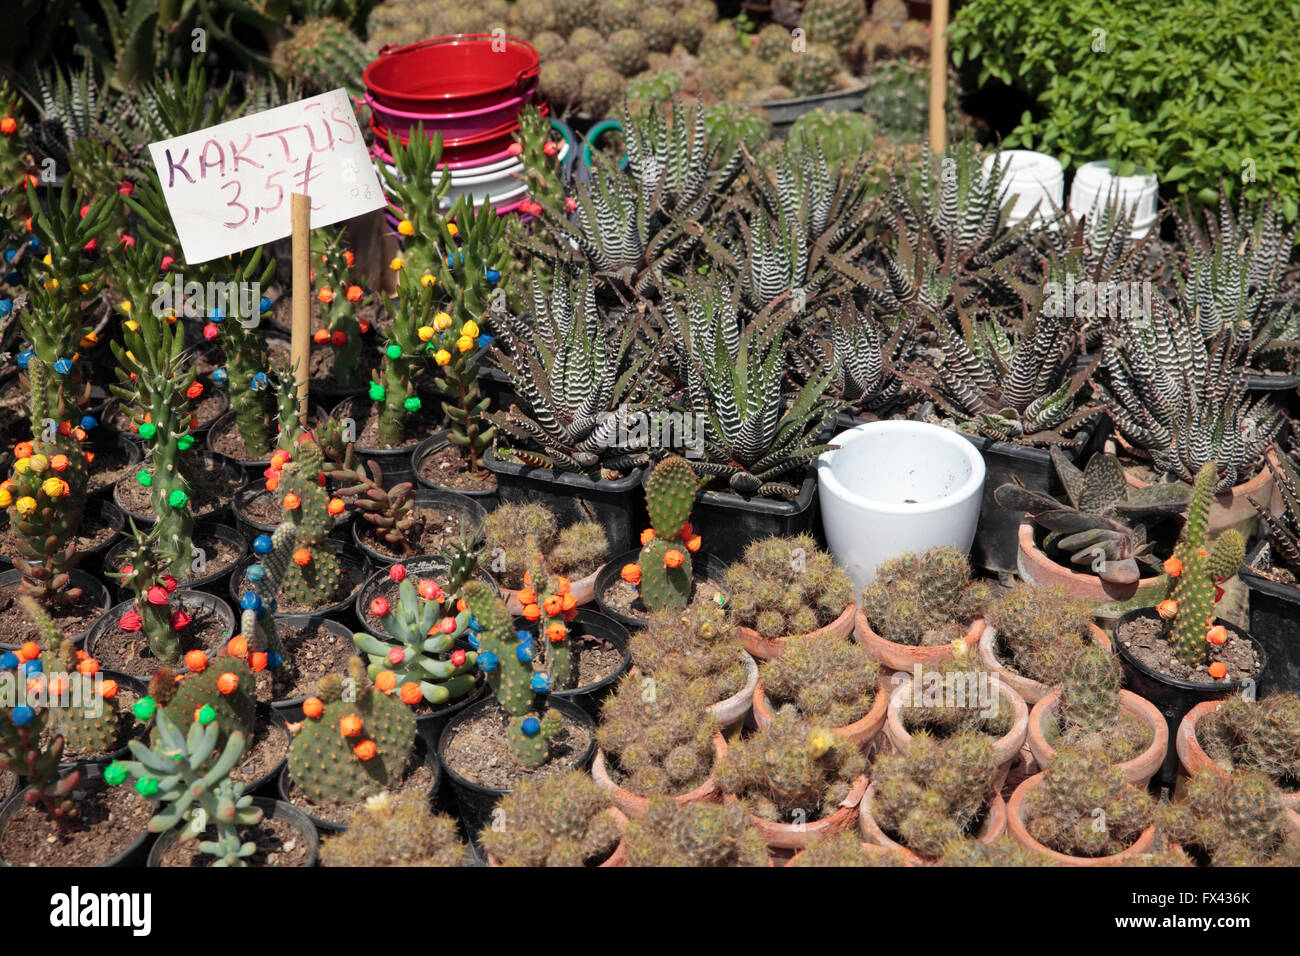 Cacti and succulents for sale at market, Istanbul, Turkey Stock Photo